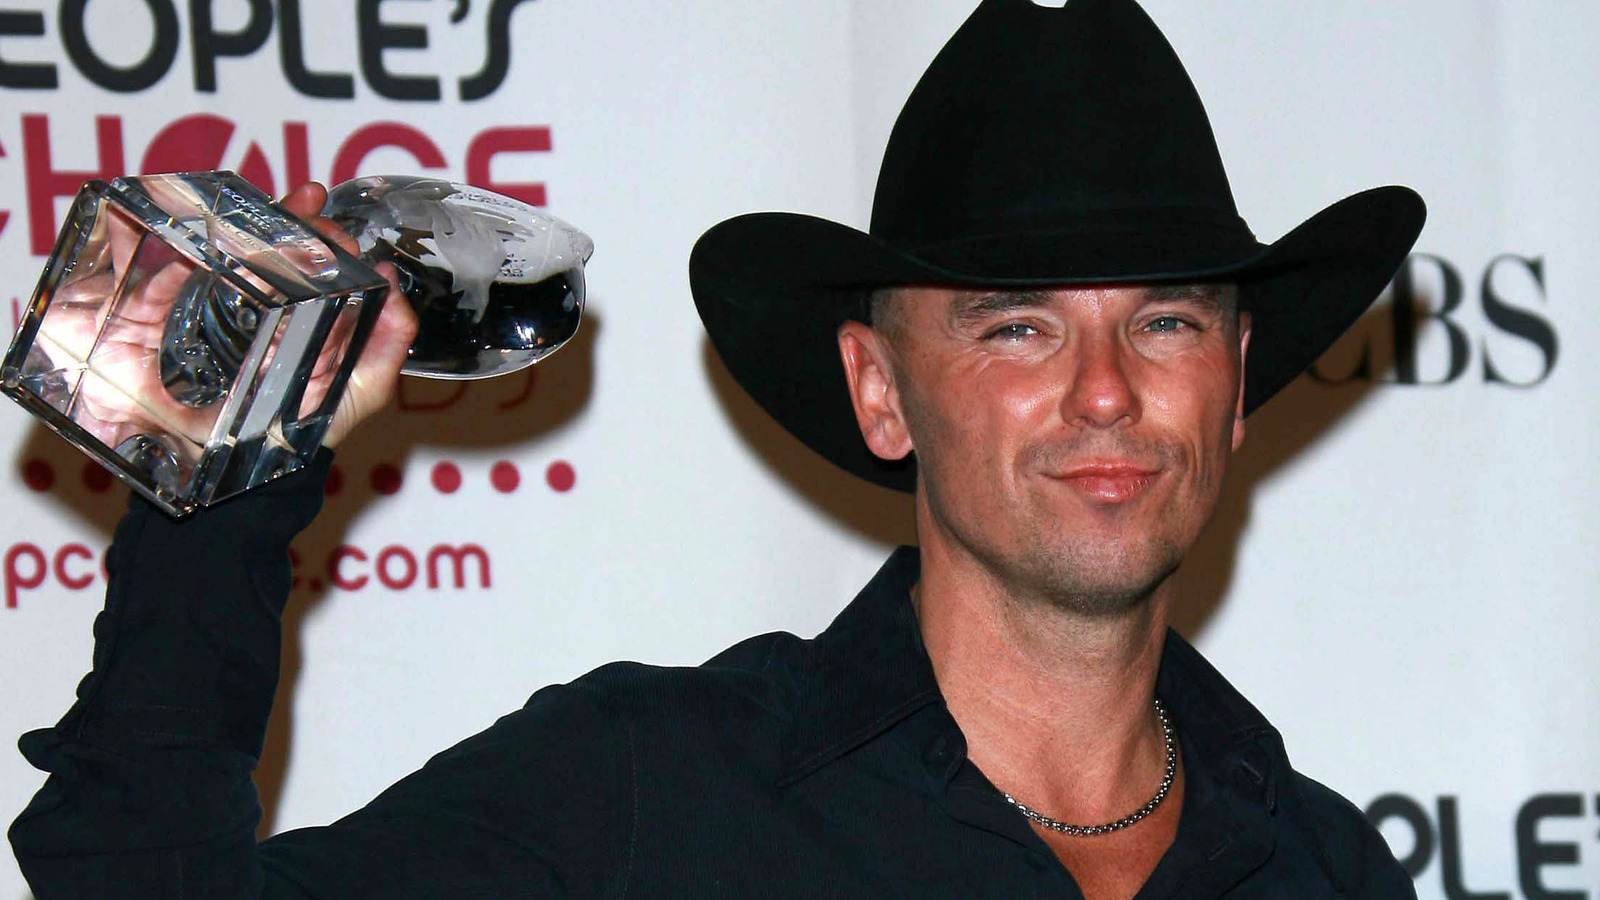 A Look At Kenny Chesney's Private Relationship With Girlfriend Mary